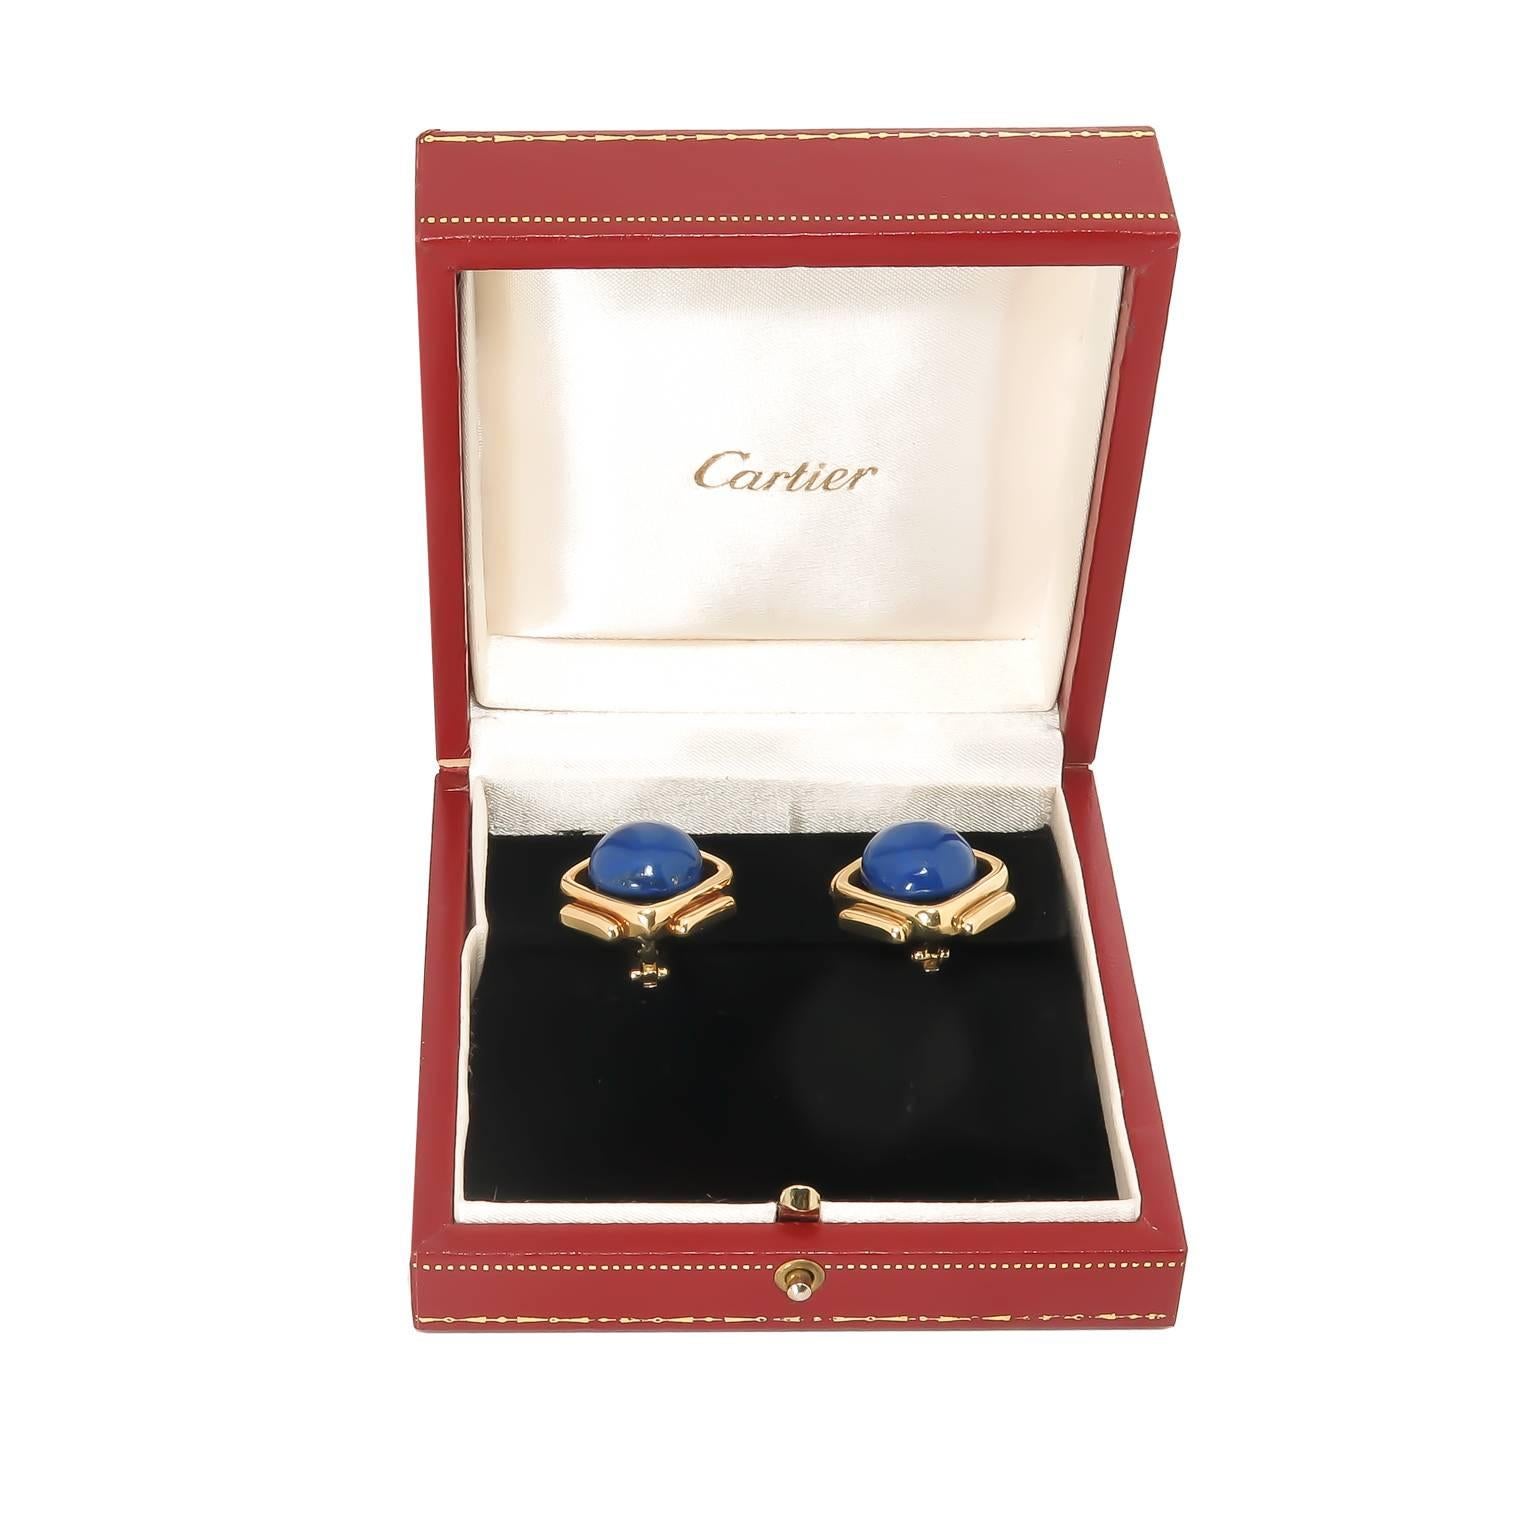 Circa 1970 Cartier 18K Yellow Gold and Lapis Lazuli Clip Earrings in a very pleasing Mid Century design the earrings measure 1 X 1 Inch and are centrally set with a Gem color Lapis domed Button. very well made clip backs, signed, numbered and in the